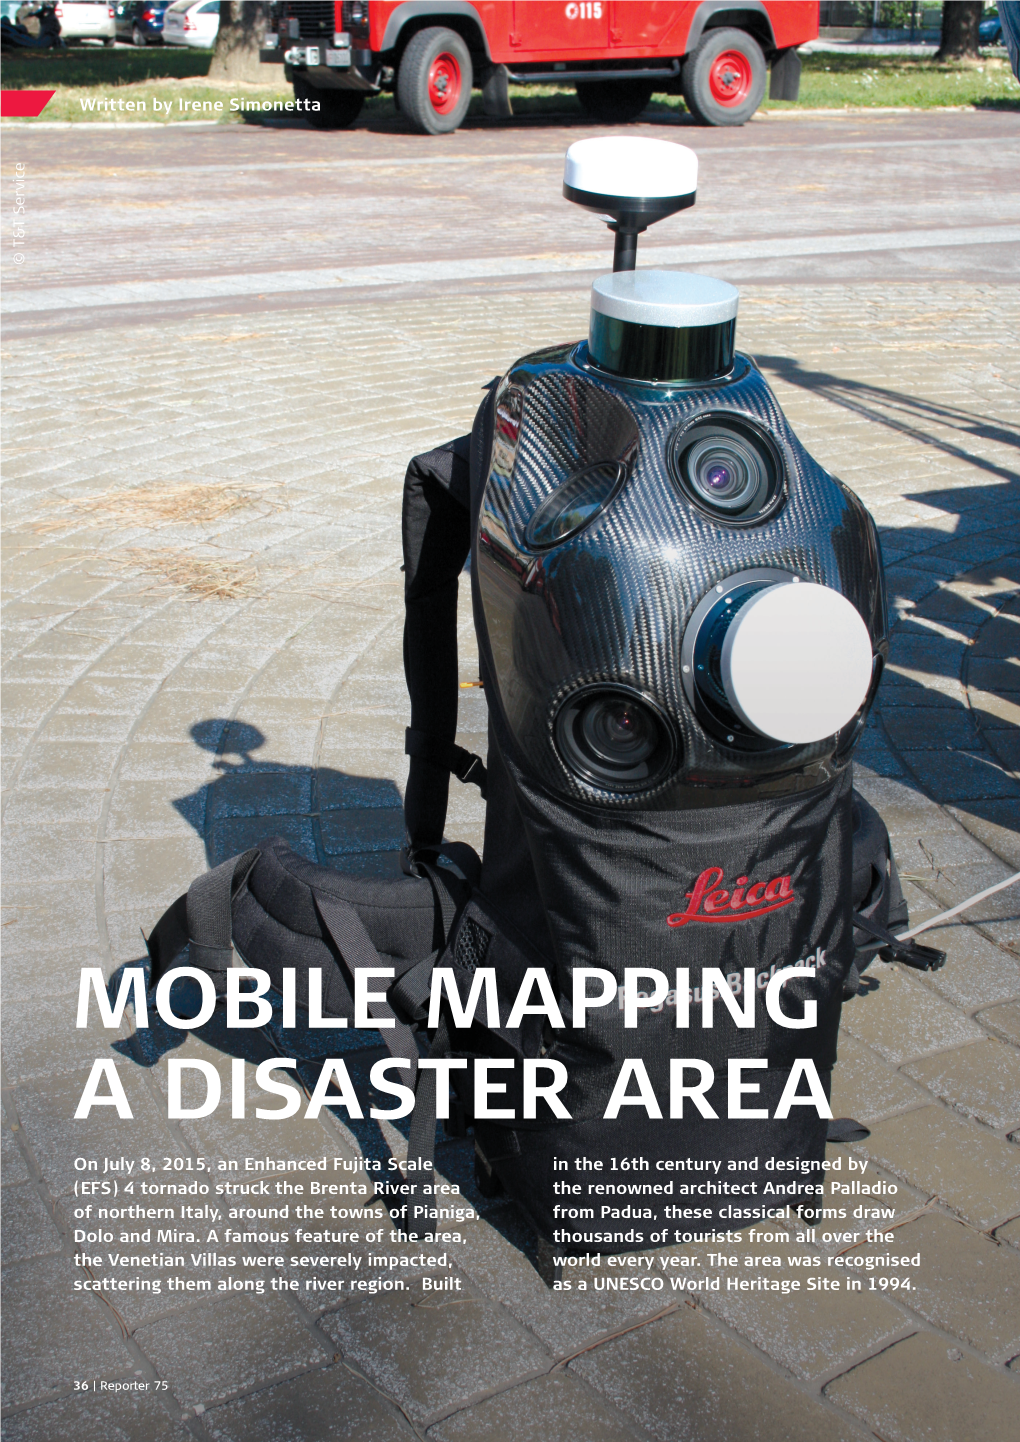 Mobile Mapping a Disaster Area